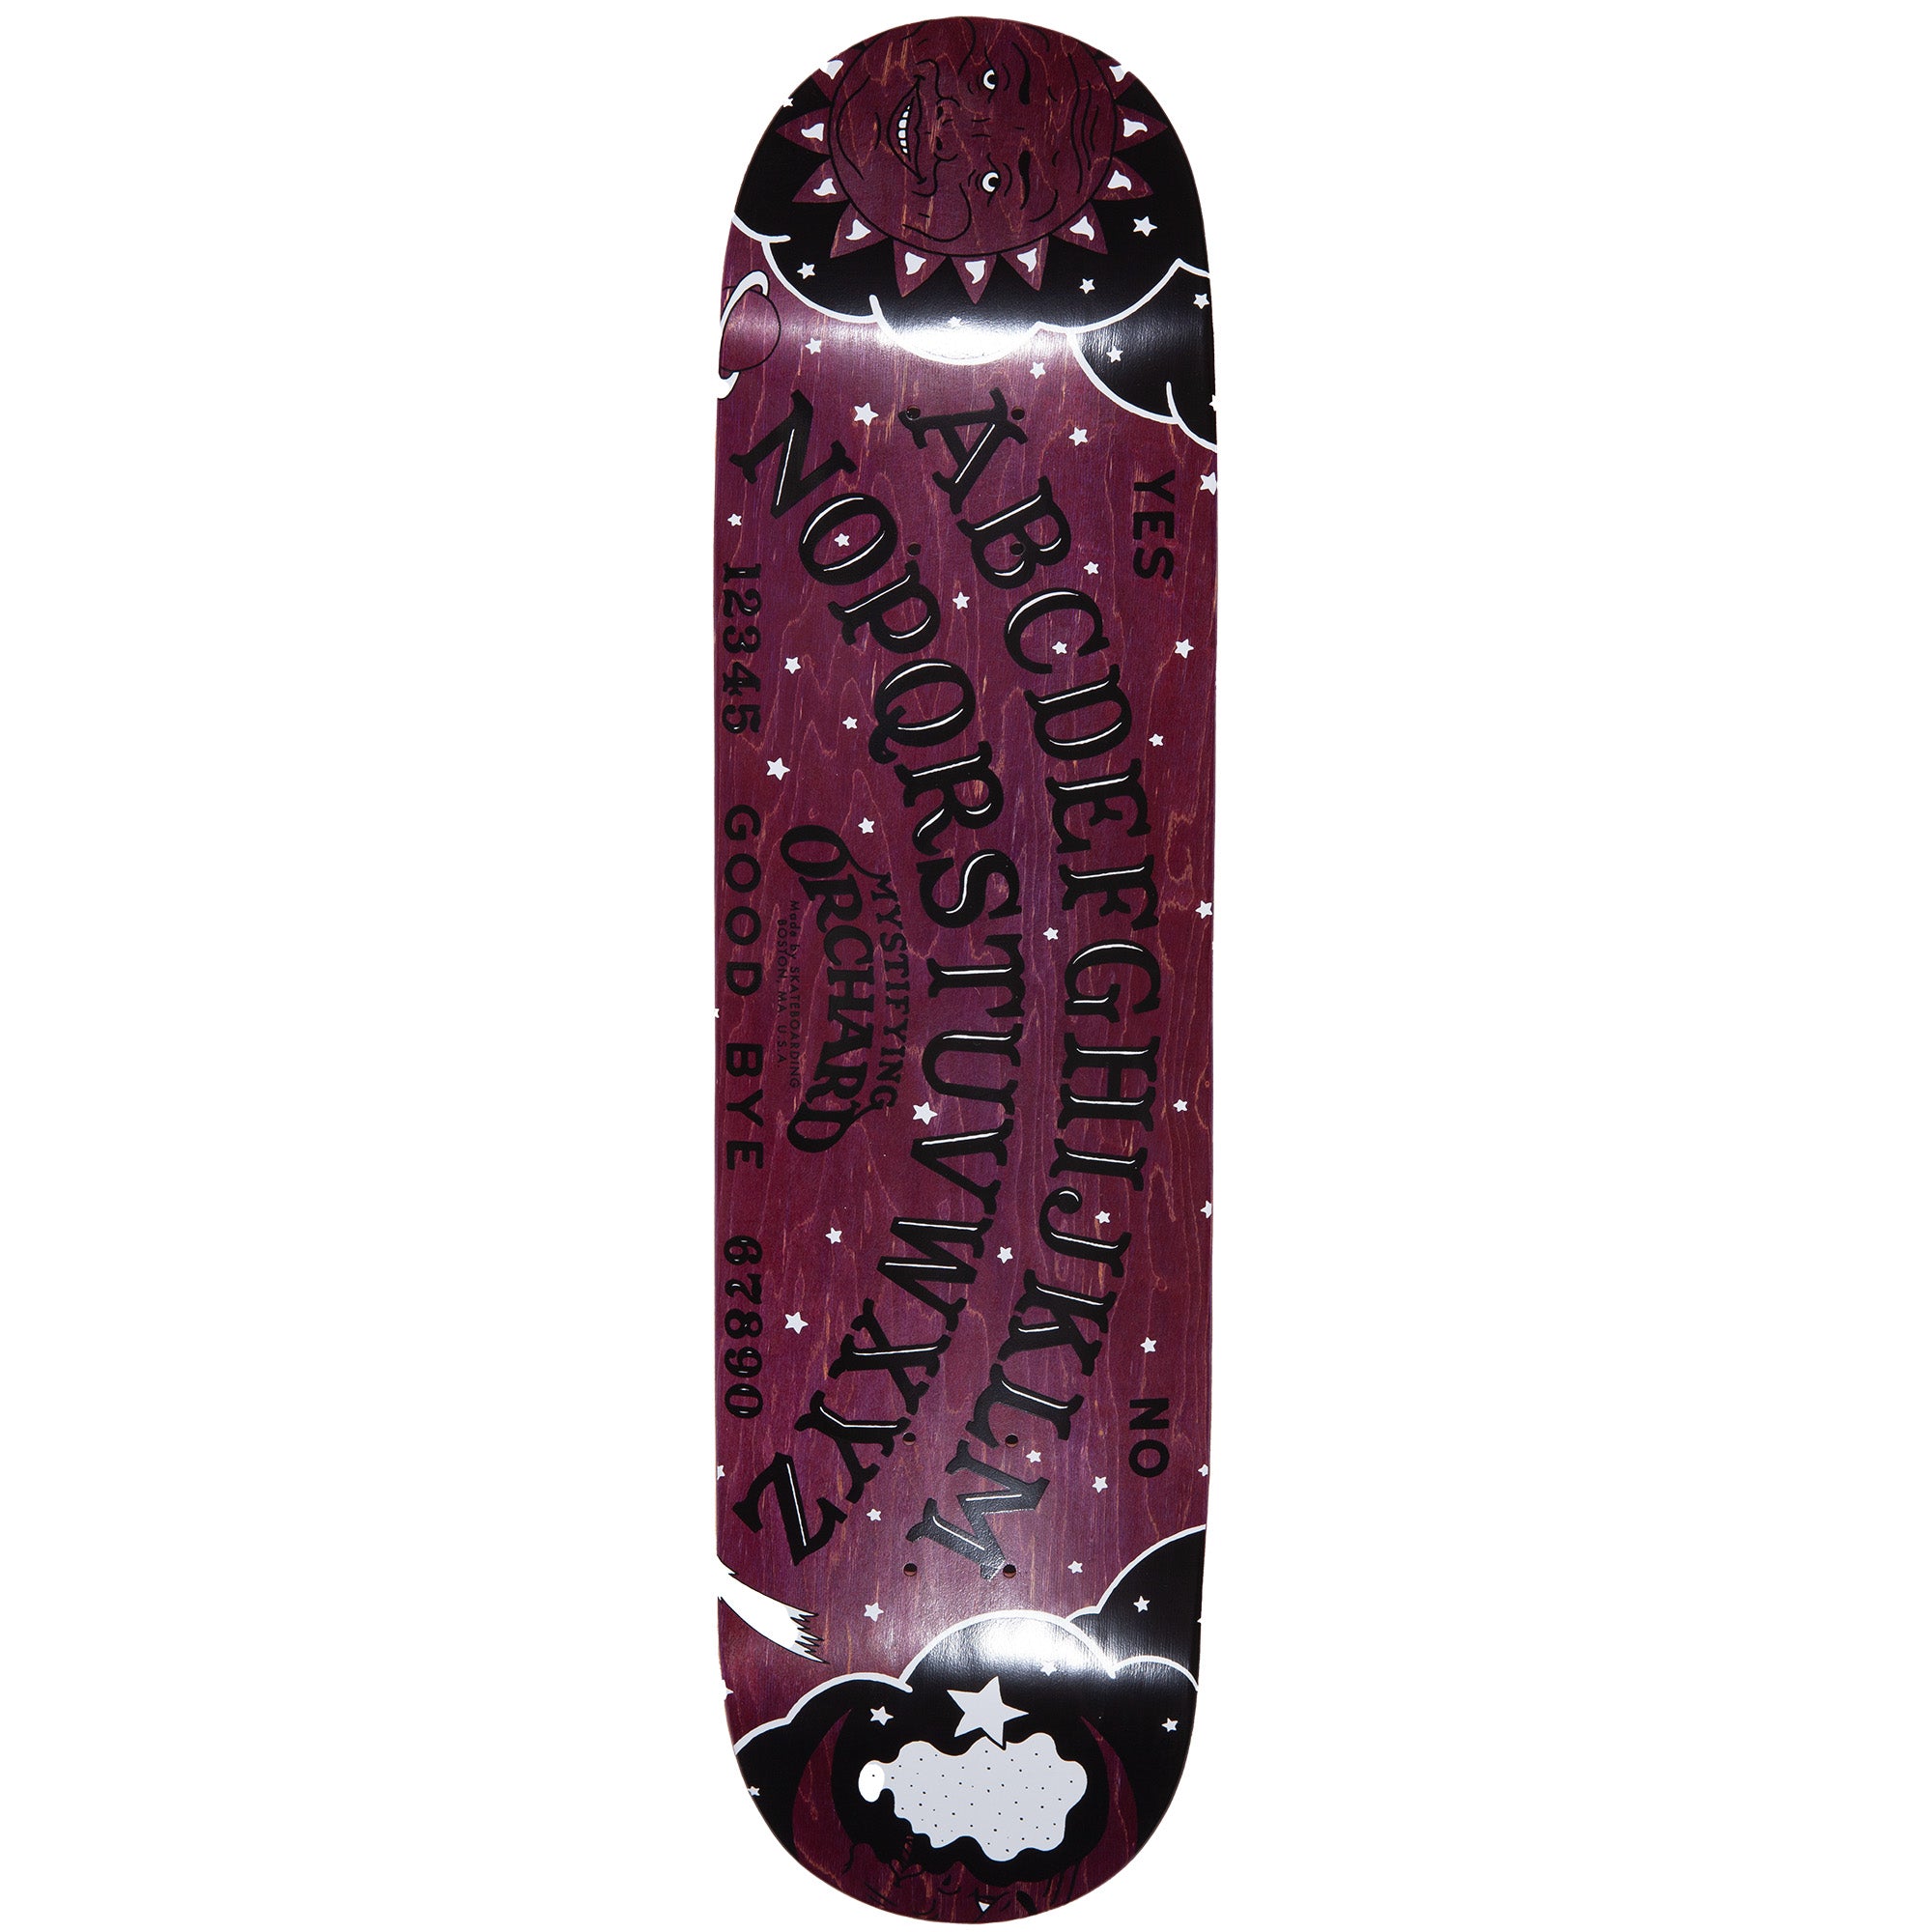 Orchard Mystifying Deck 7.75" Assorted Stains